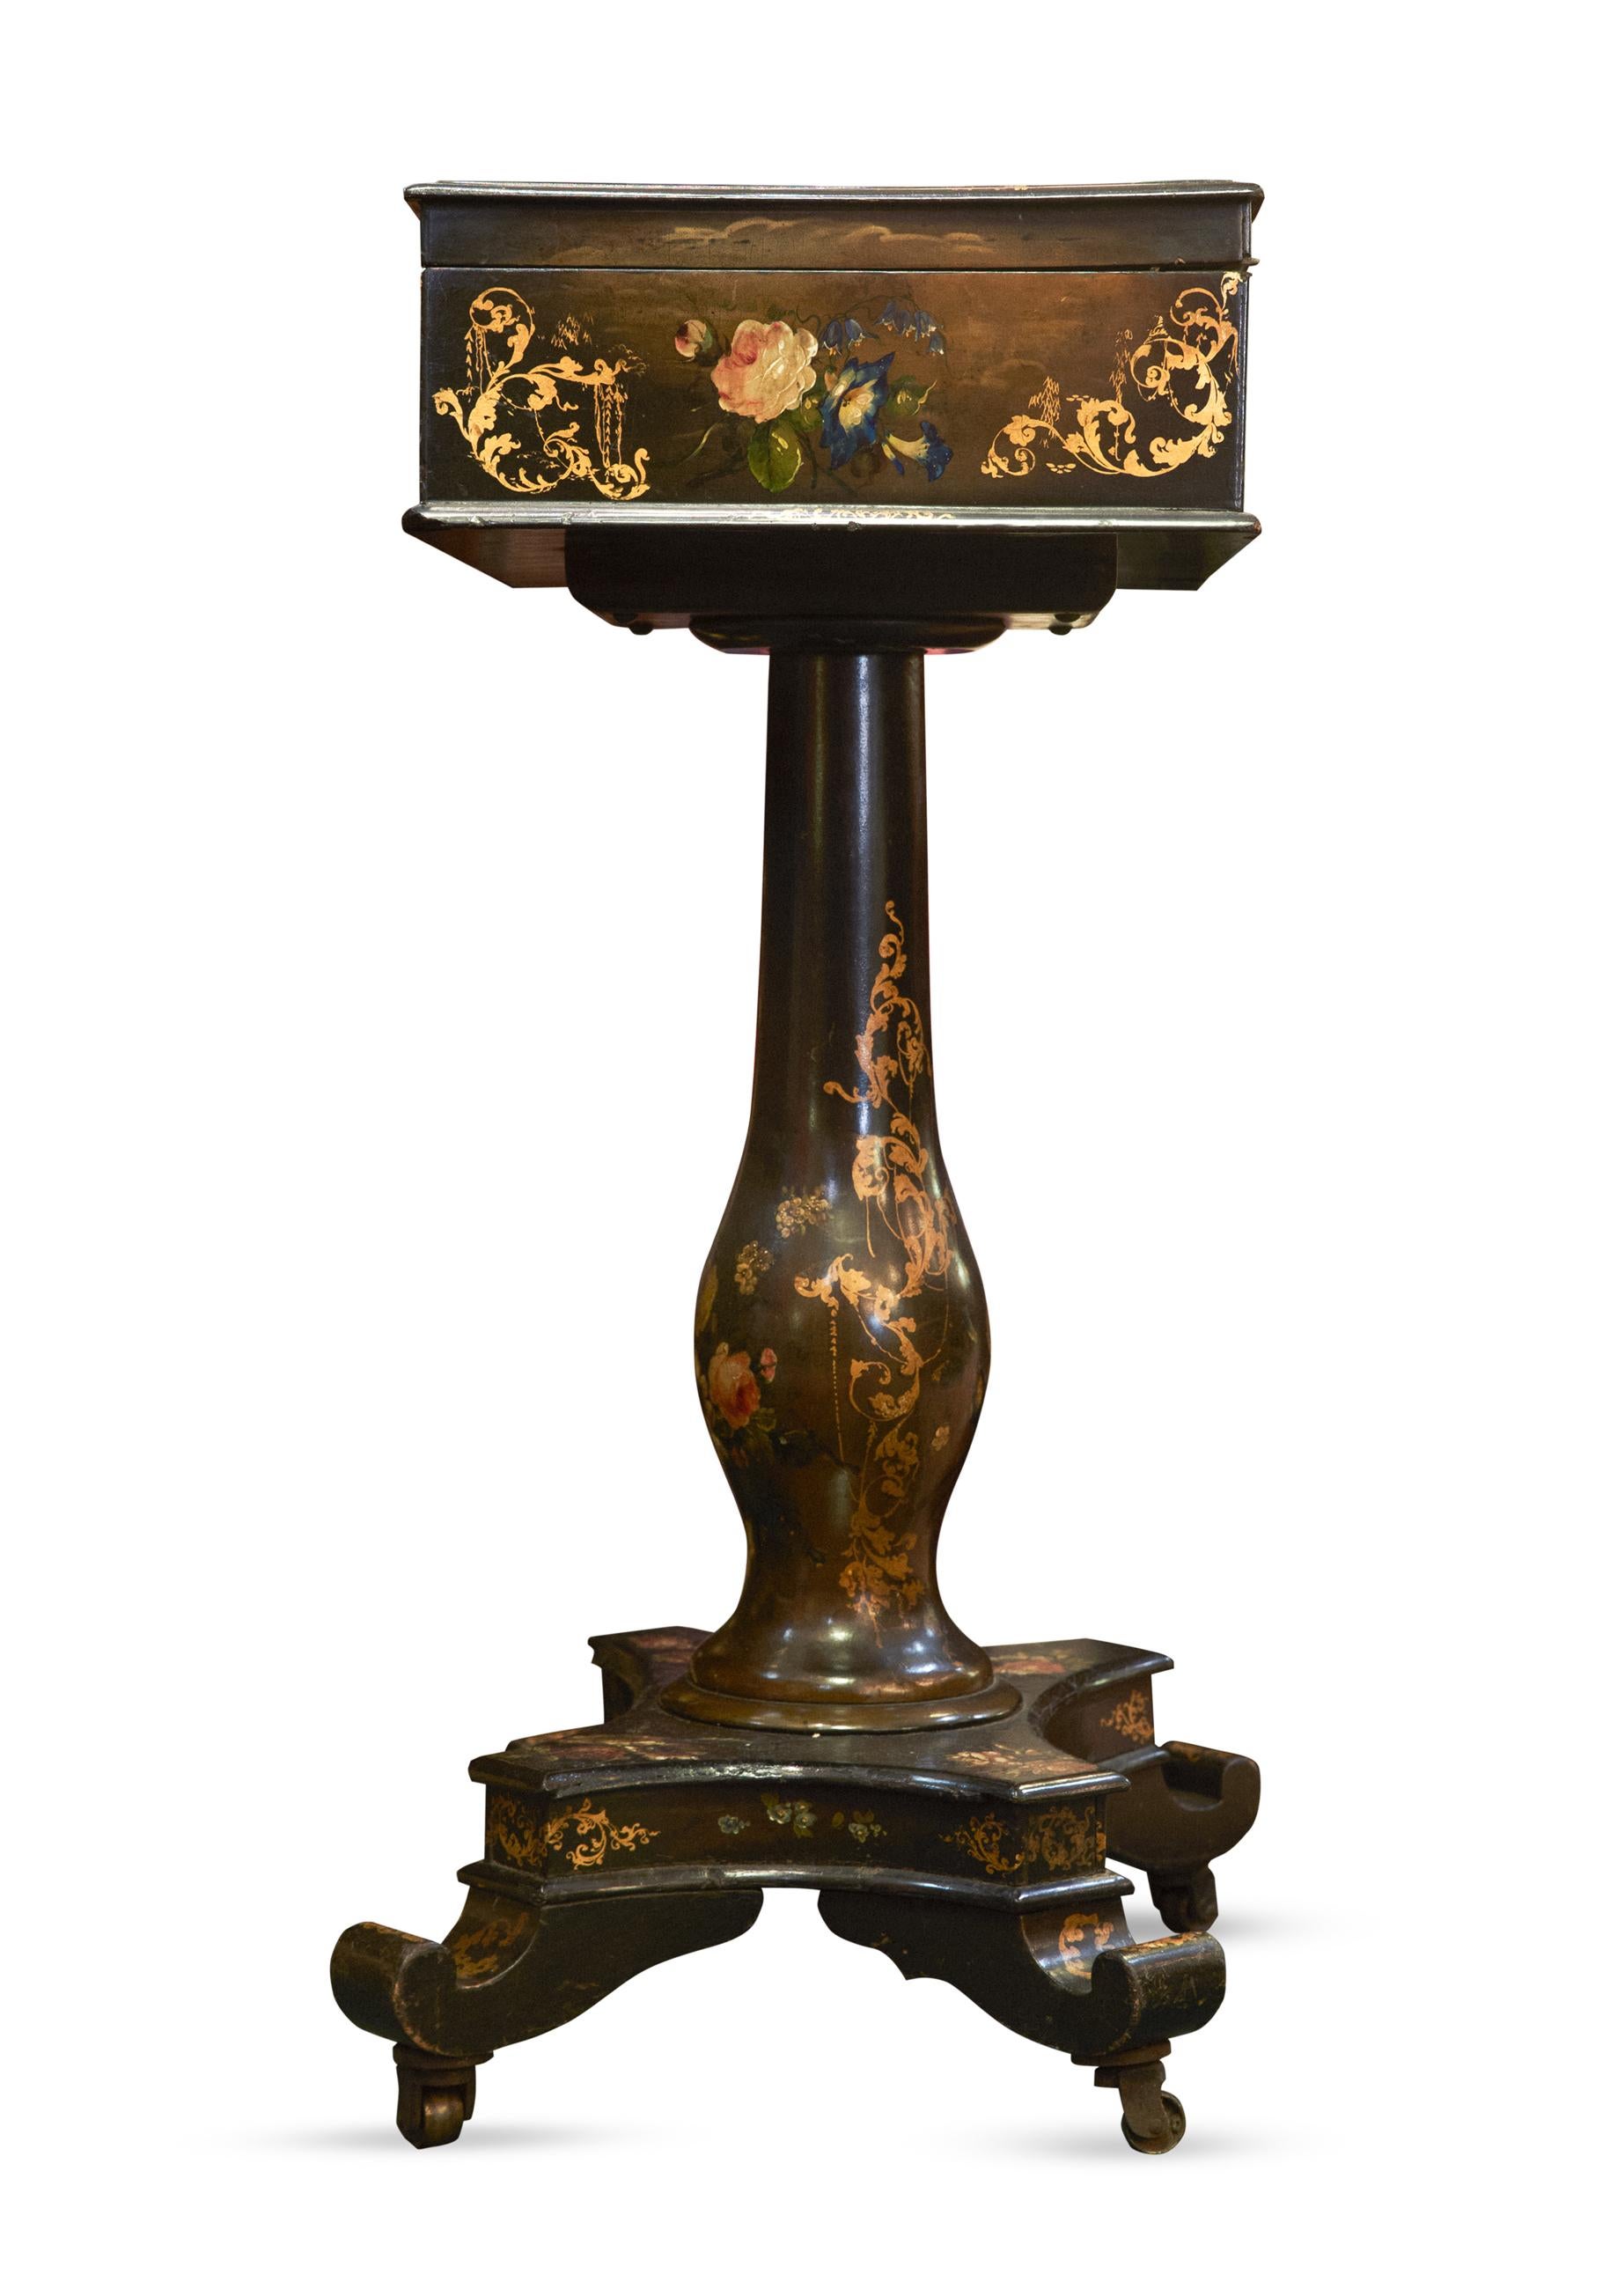 American Victorian Wood and Paper Mache sewing box on pedestal base
Paper Mache depicts bird and flower motif. Original red velvet lines the inner boxes which have a place for all of your sewing notions.
America, circa 1840
Measures: 75